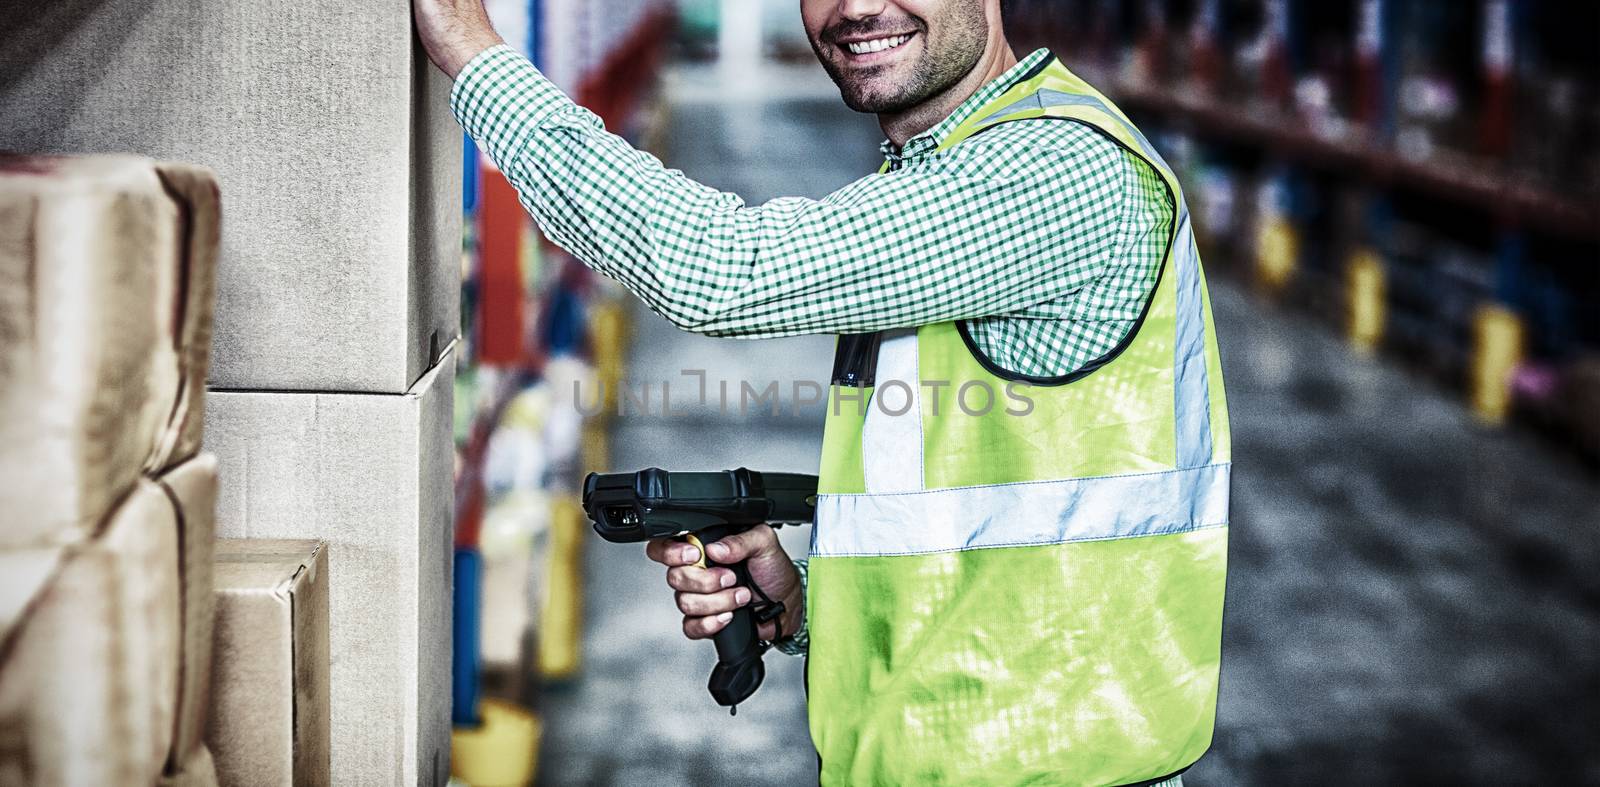 Worker is smiling and posing during work in a warehouse